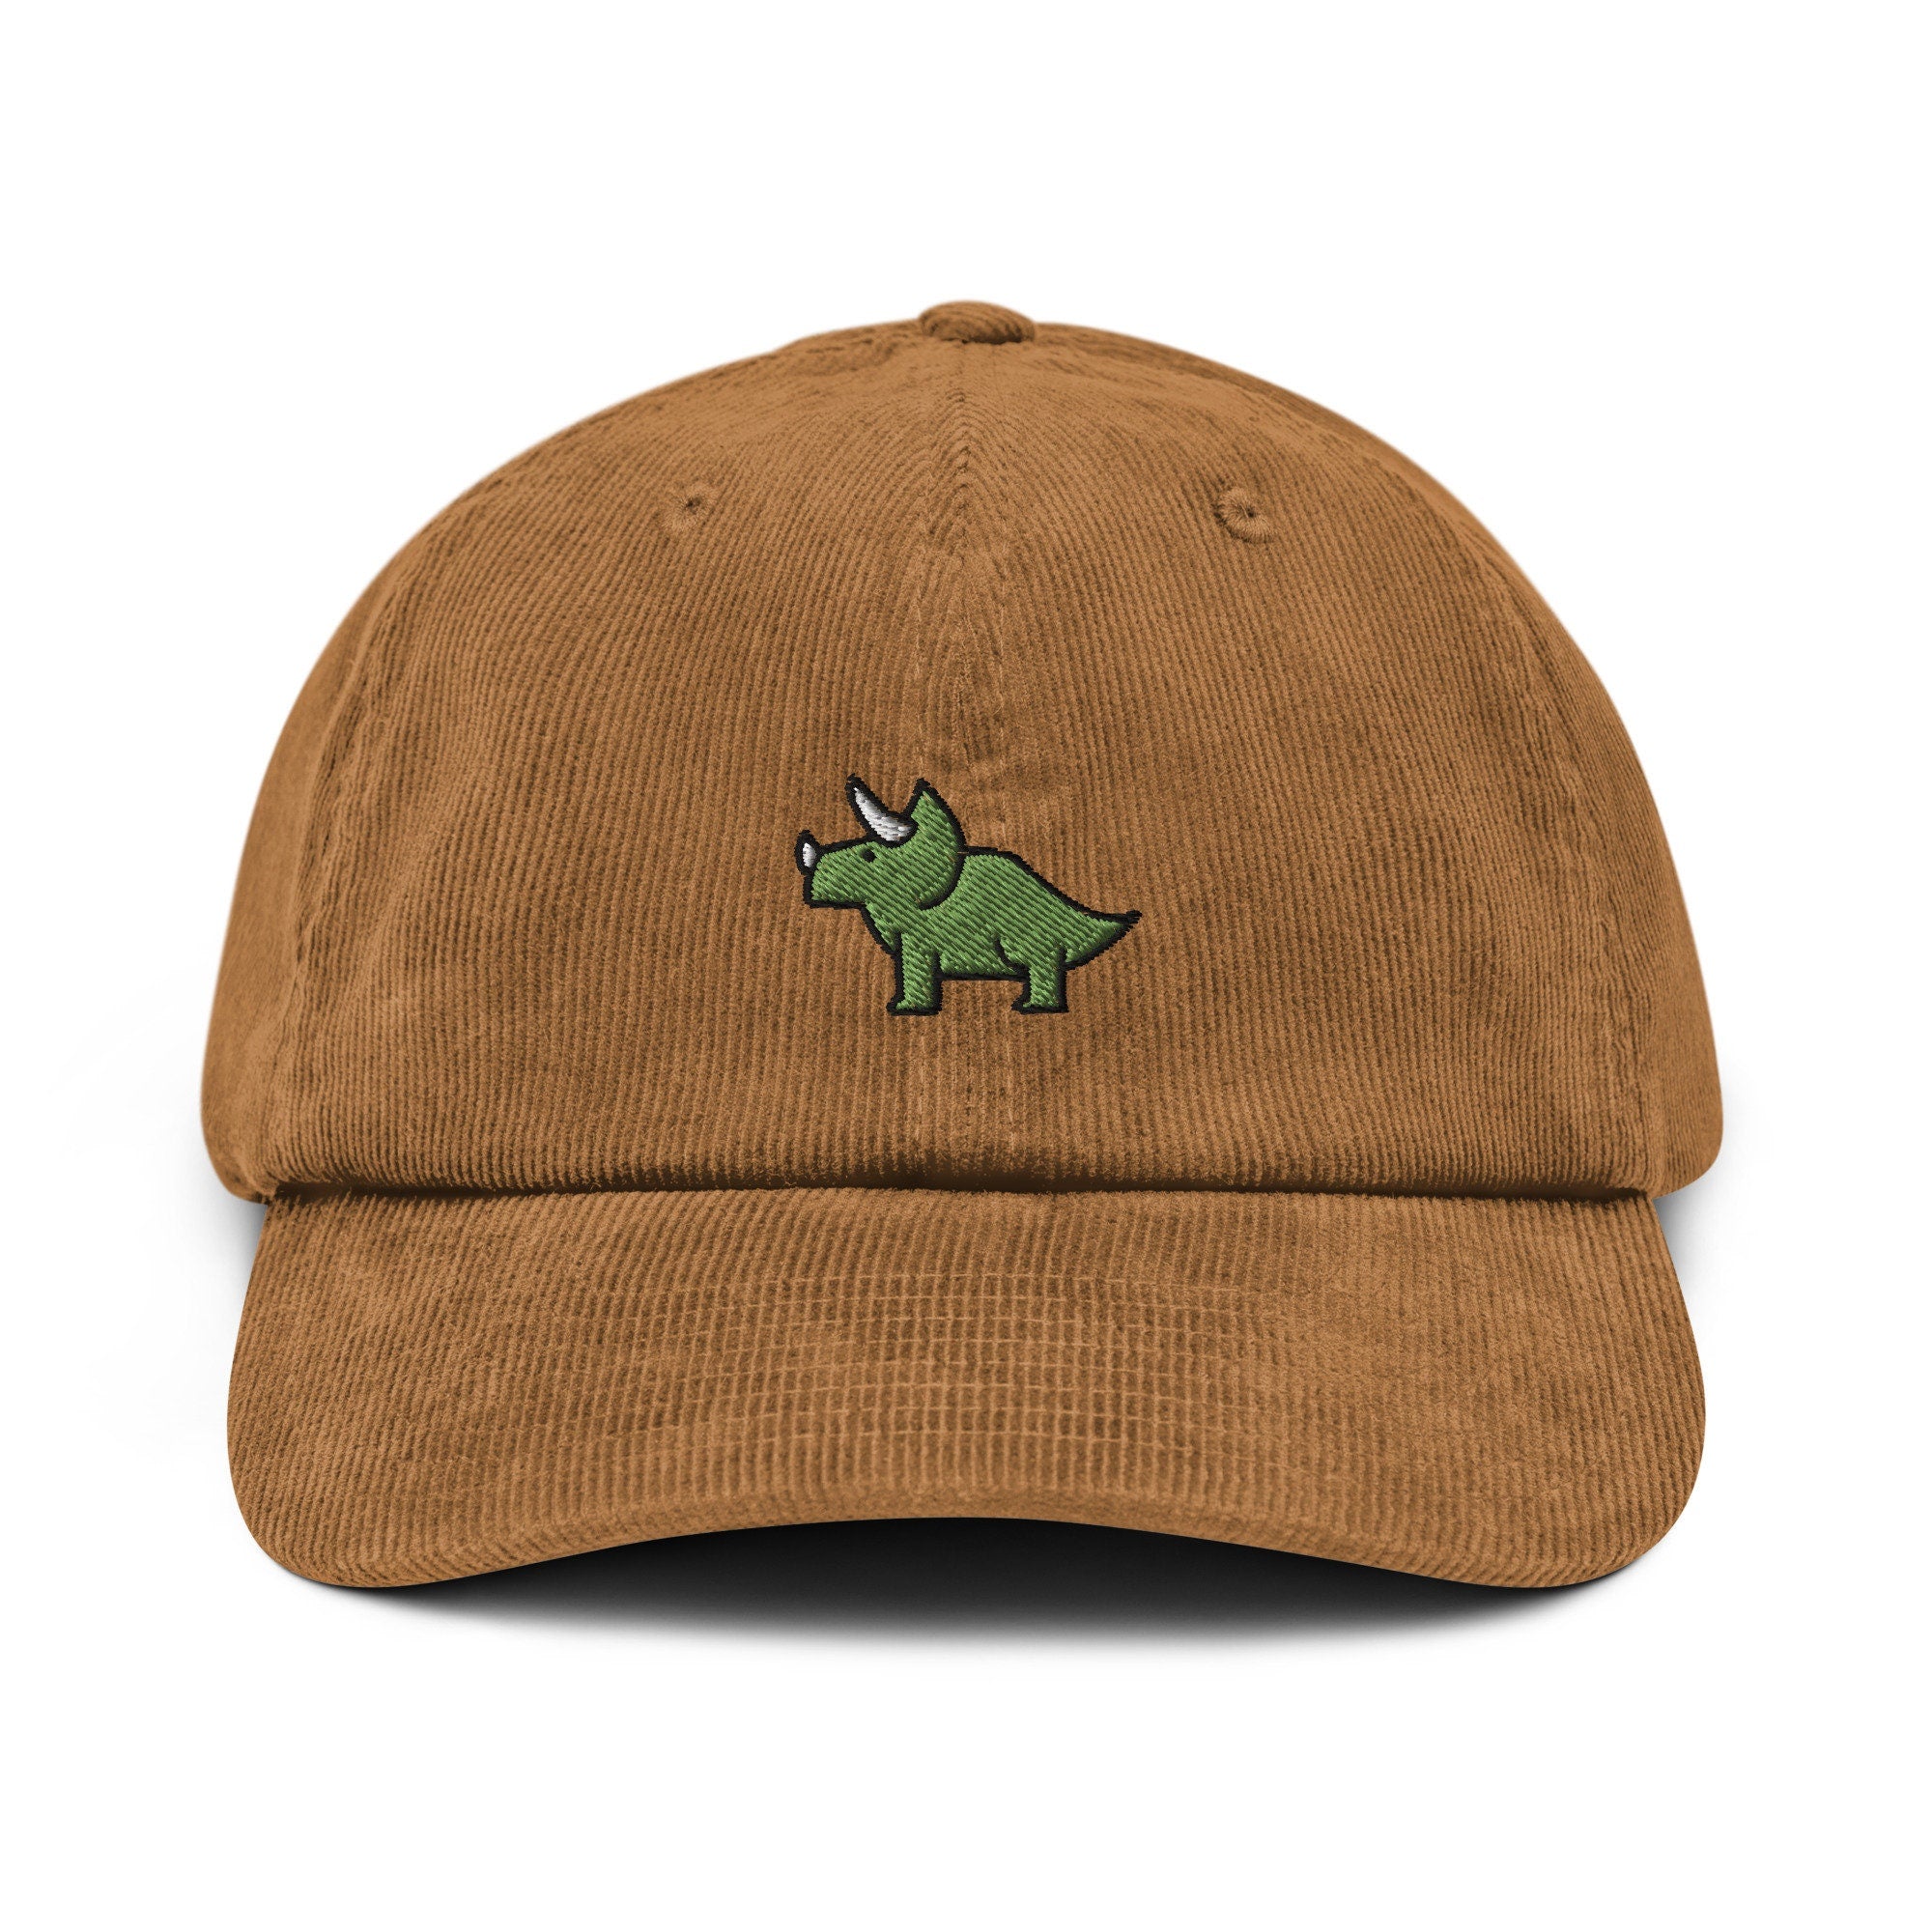 Triceratops Corduroy Hat, Handmade Embroidered Corduroy Dad Cap - Multiple Colors